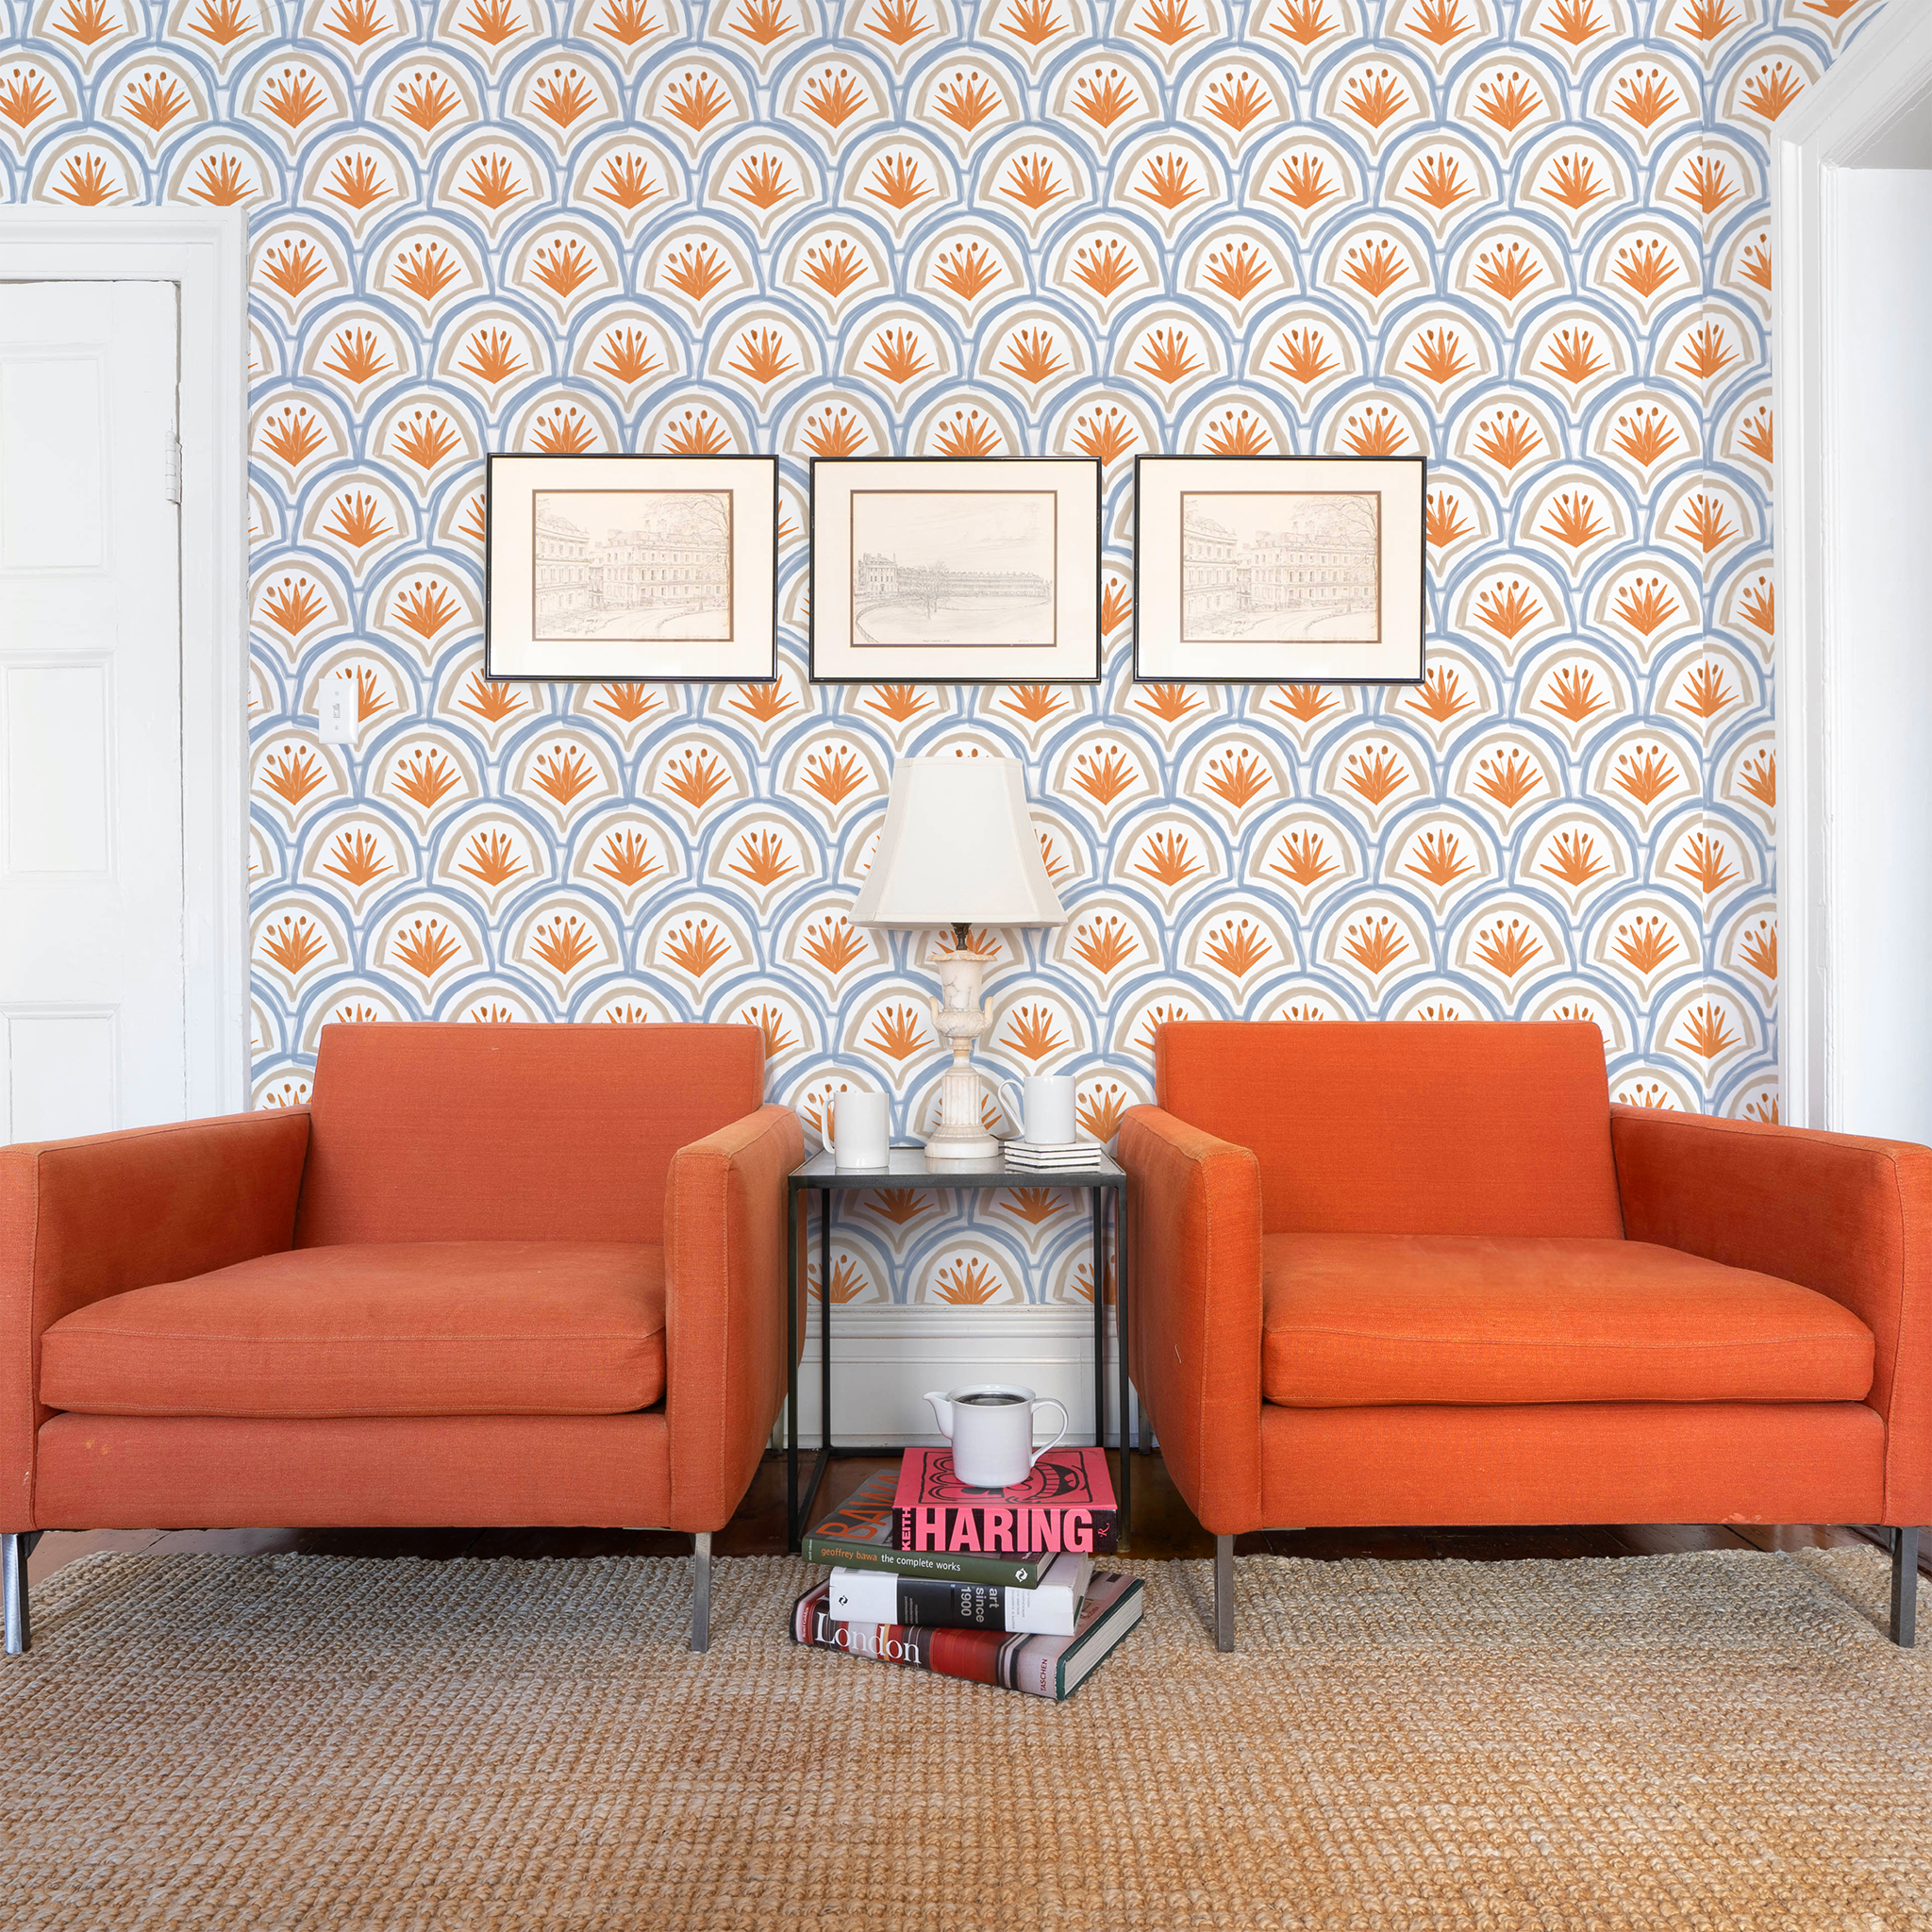 Living room styled with Art Deco Palm Pattern Printed Wallpaper and two orange sofa chairs with a white lamp on table and books stacked on floor in between them